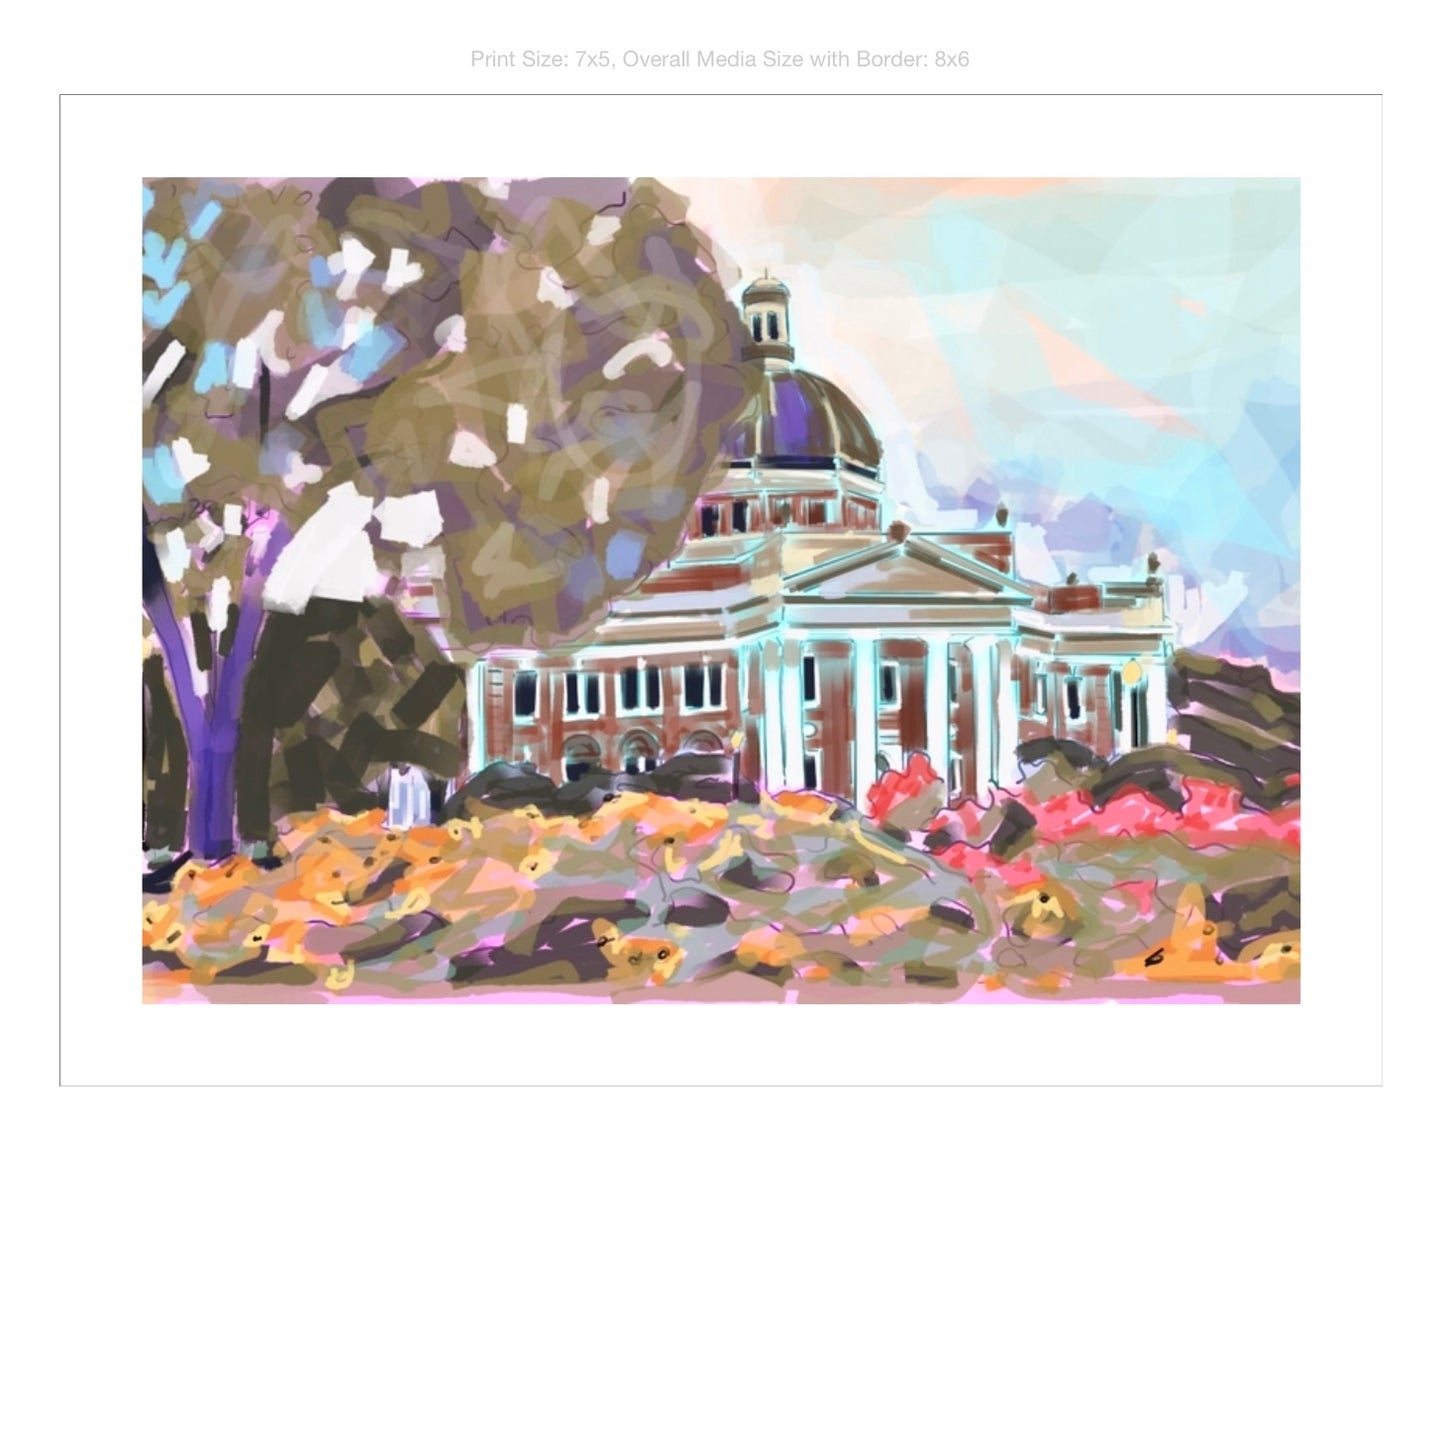 Southern Miss Campus Giclee on Premium Heavyweight Paper